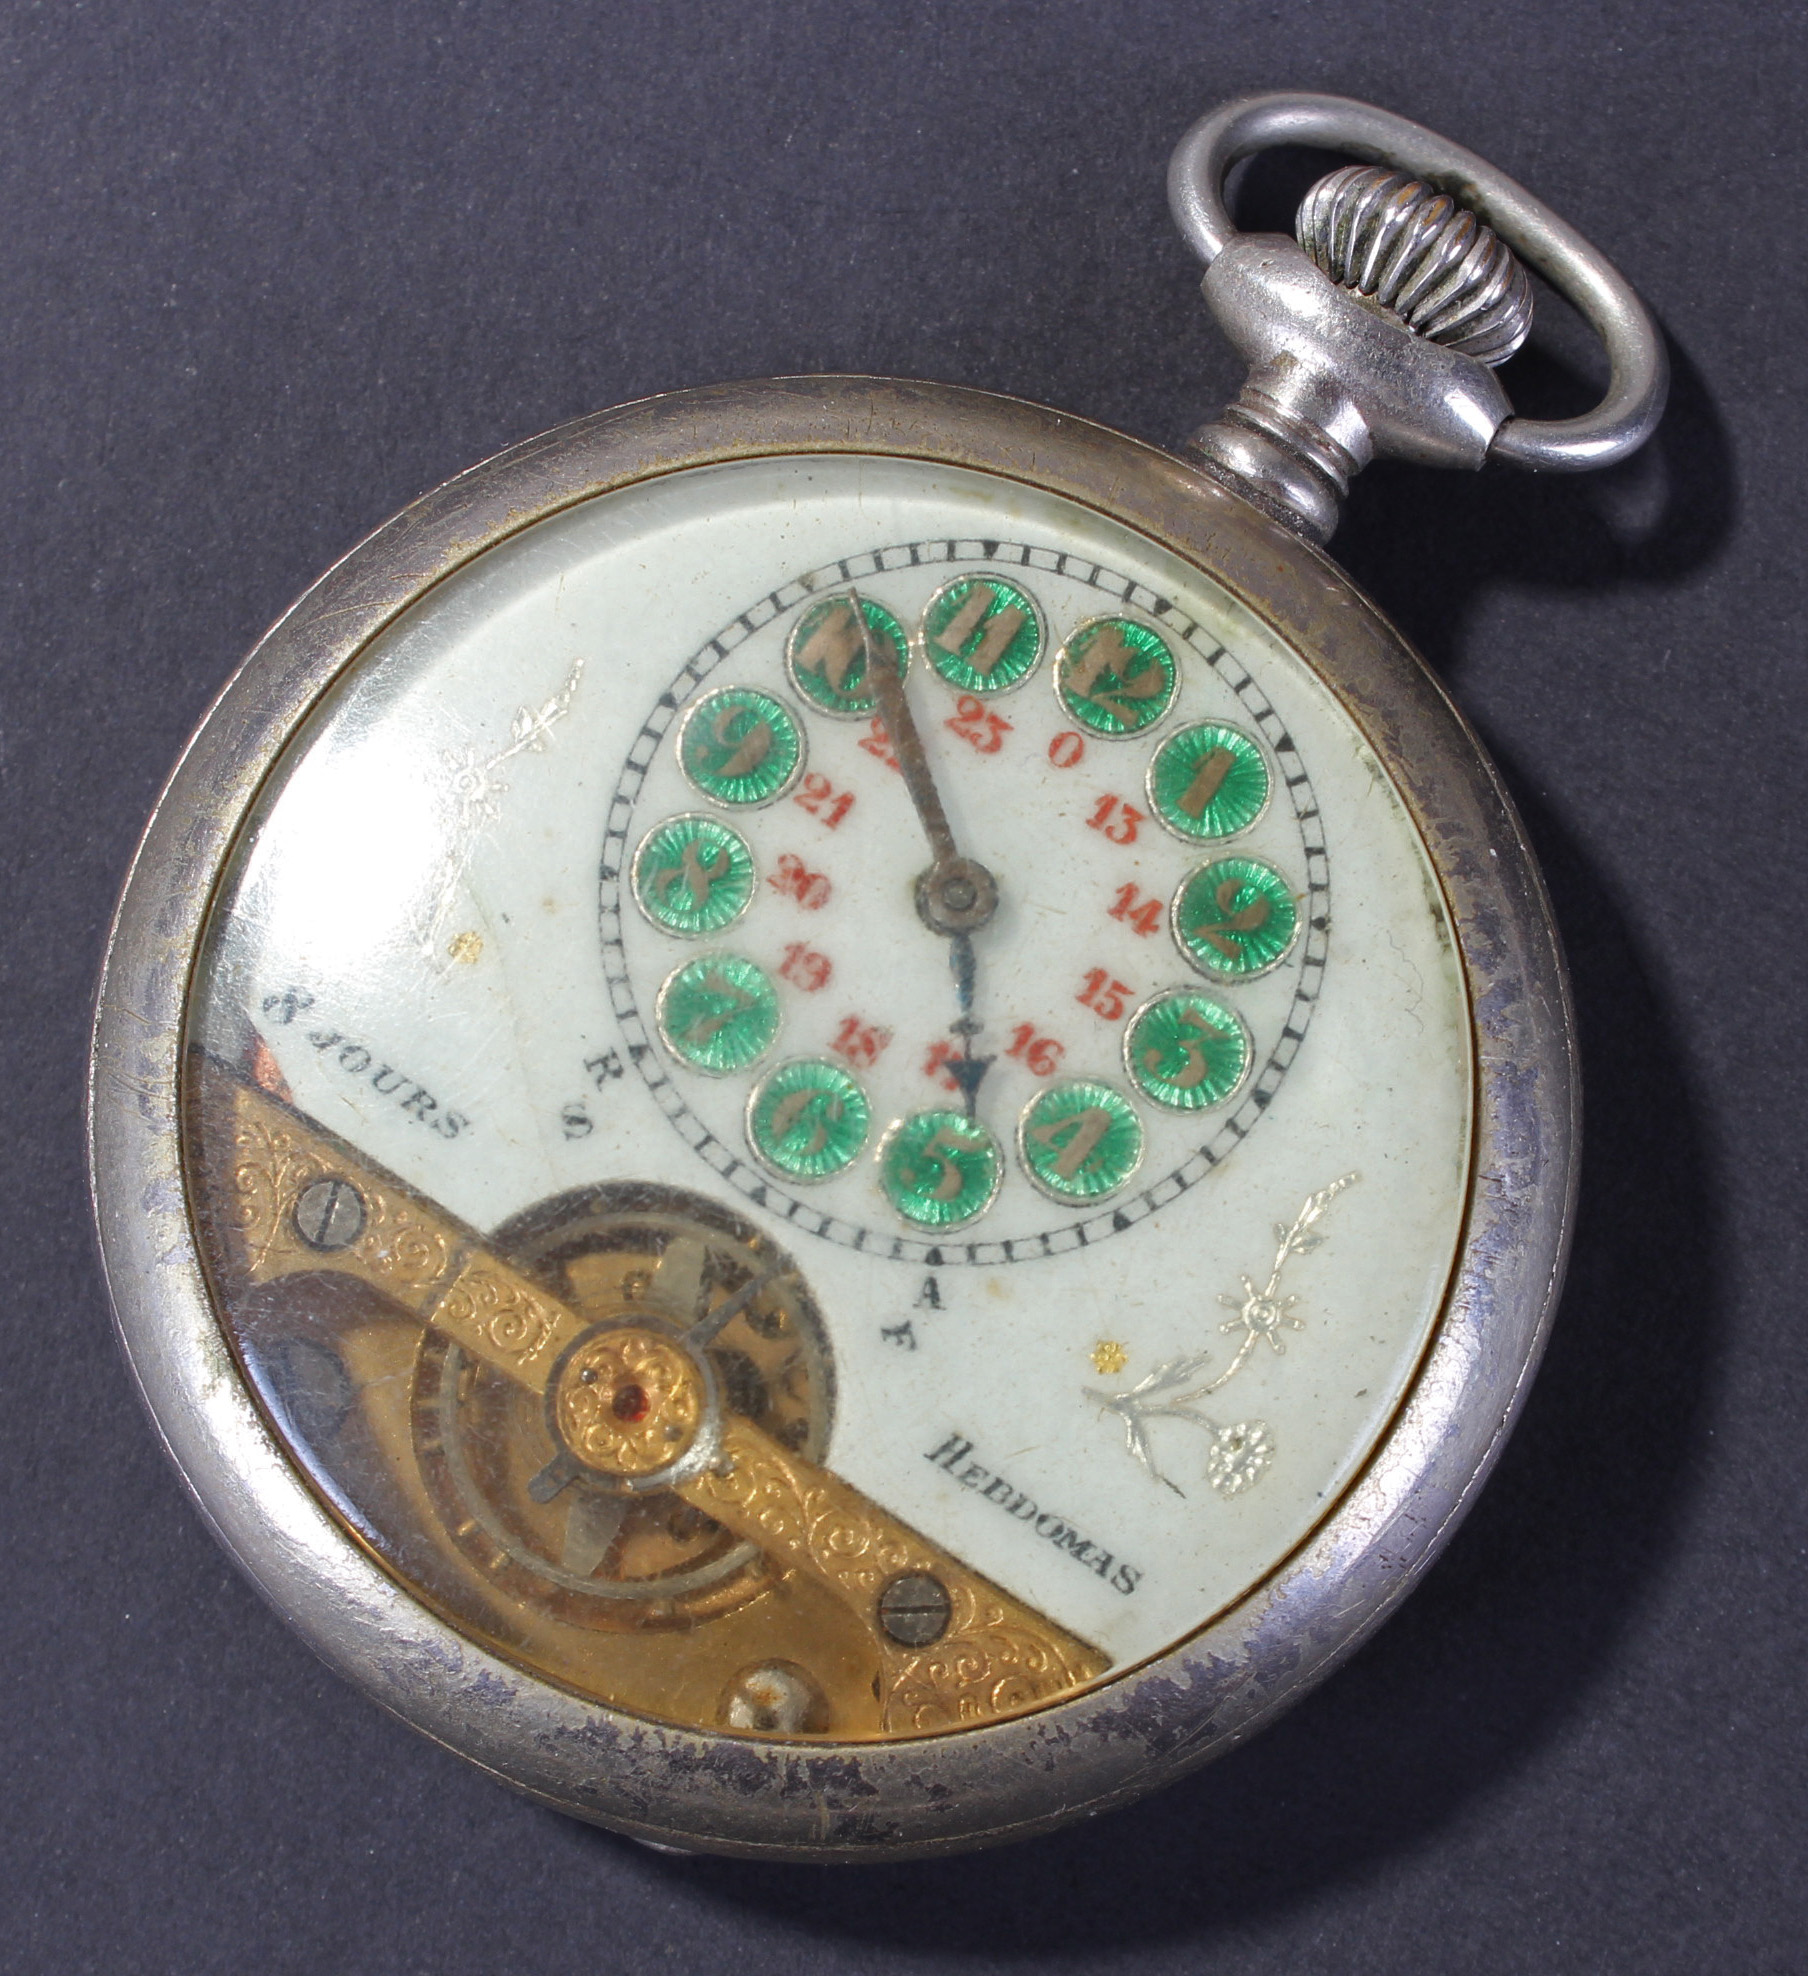 Hebdomas open face gentleman`s pocket watch, the white enamel face having reduced dial with green